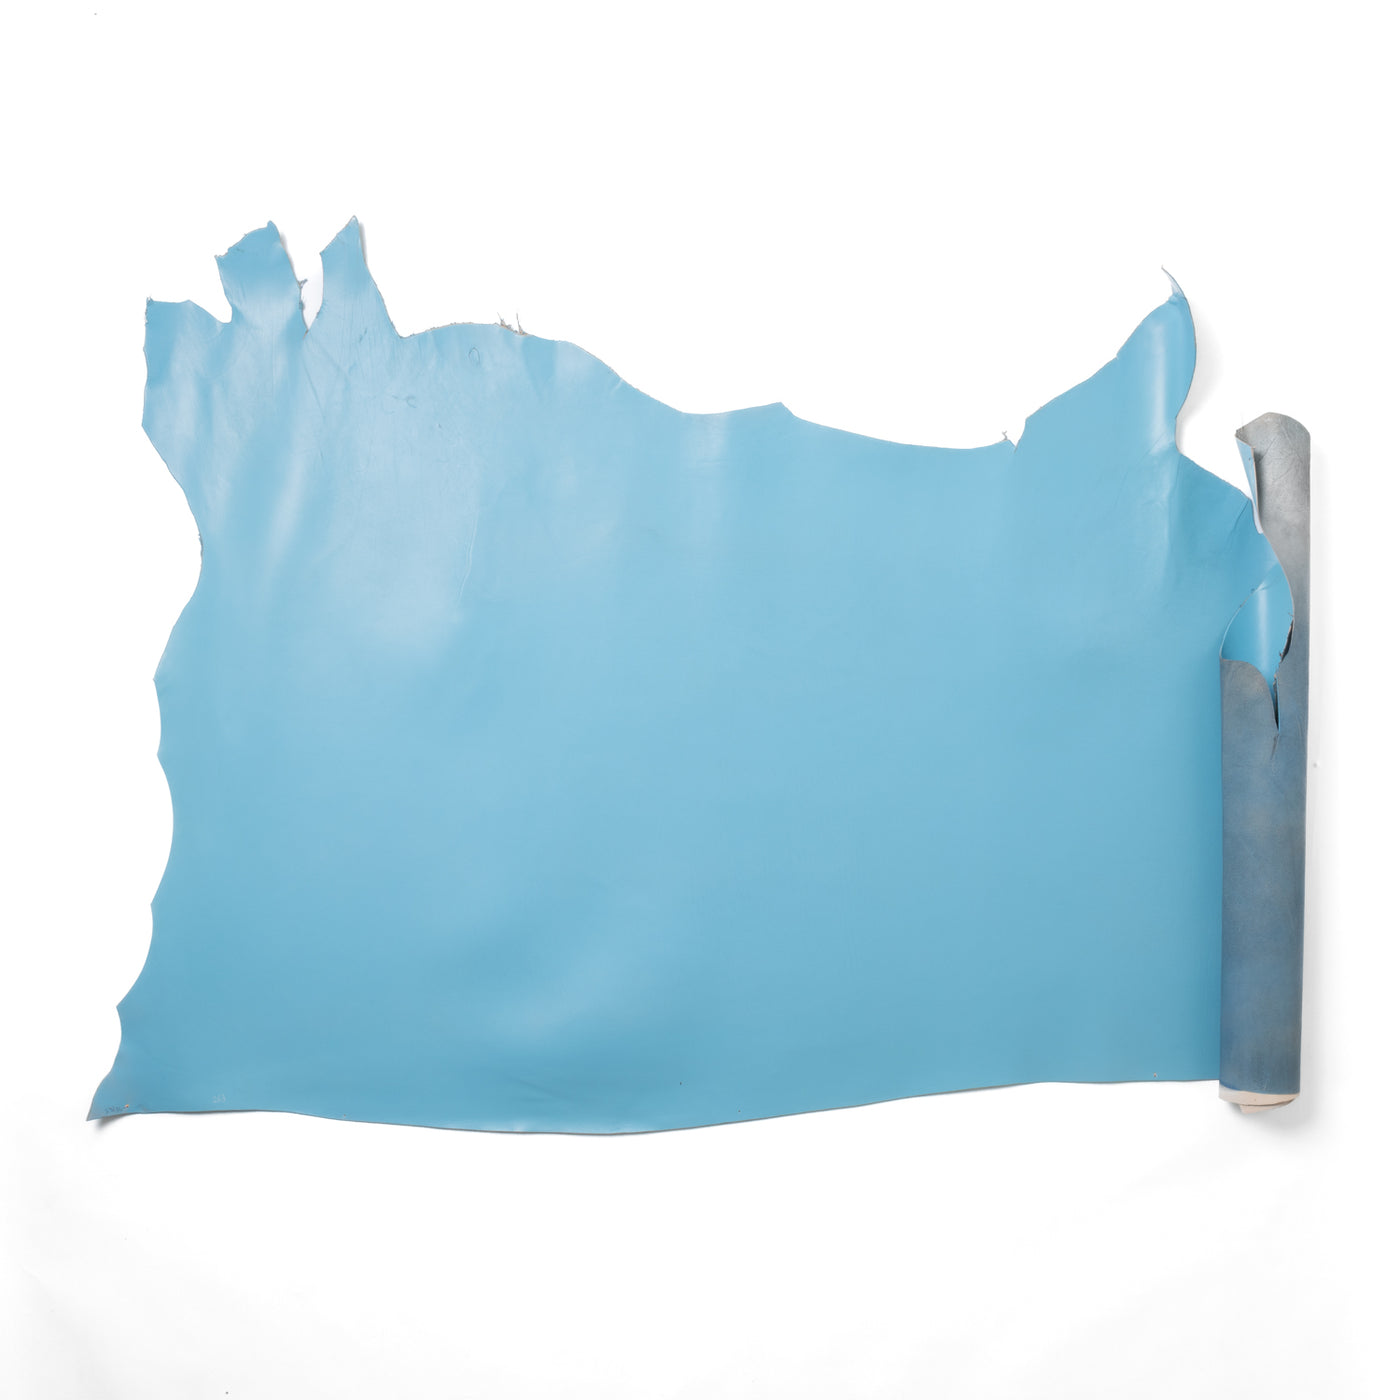 Tanned/smooth leather, half cut / sky blue